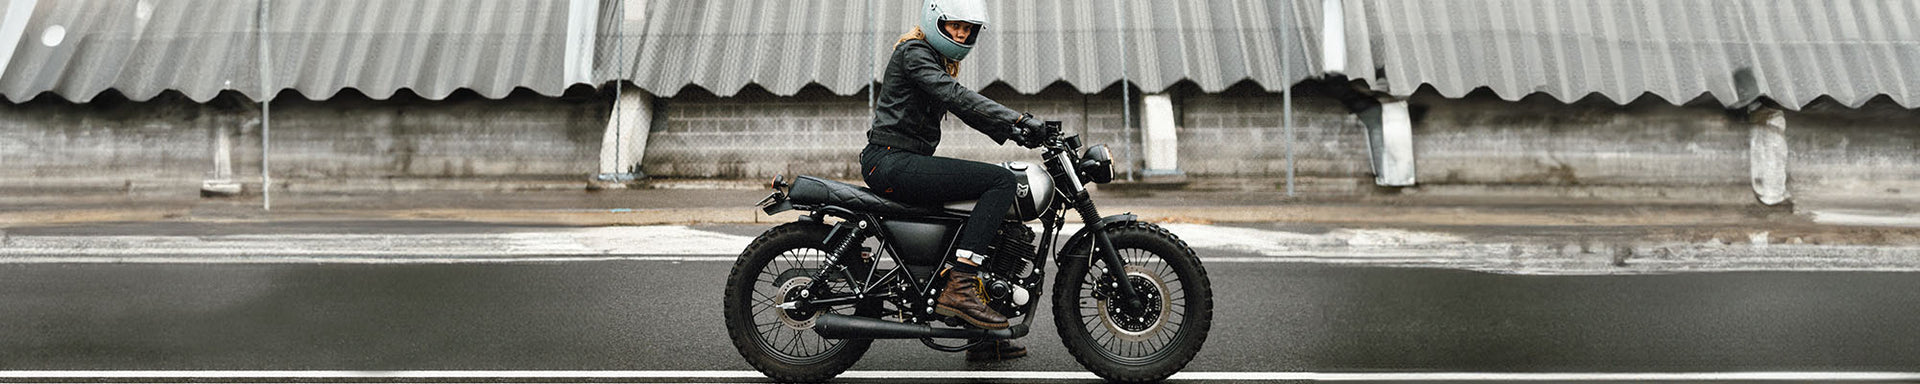 Kevlar-Reinforced Riding Jeans - Women Riders Now